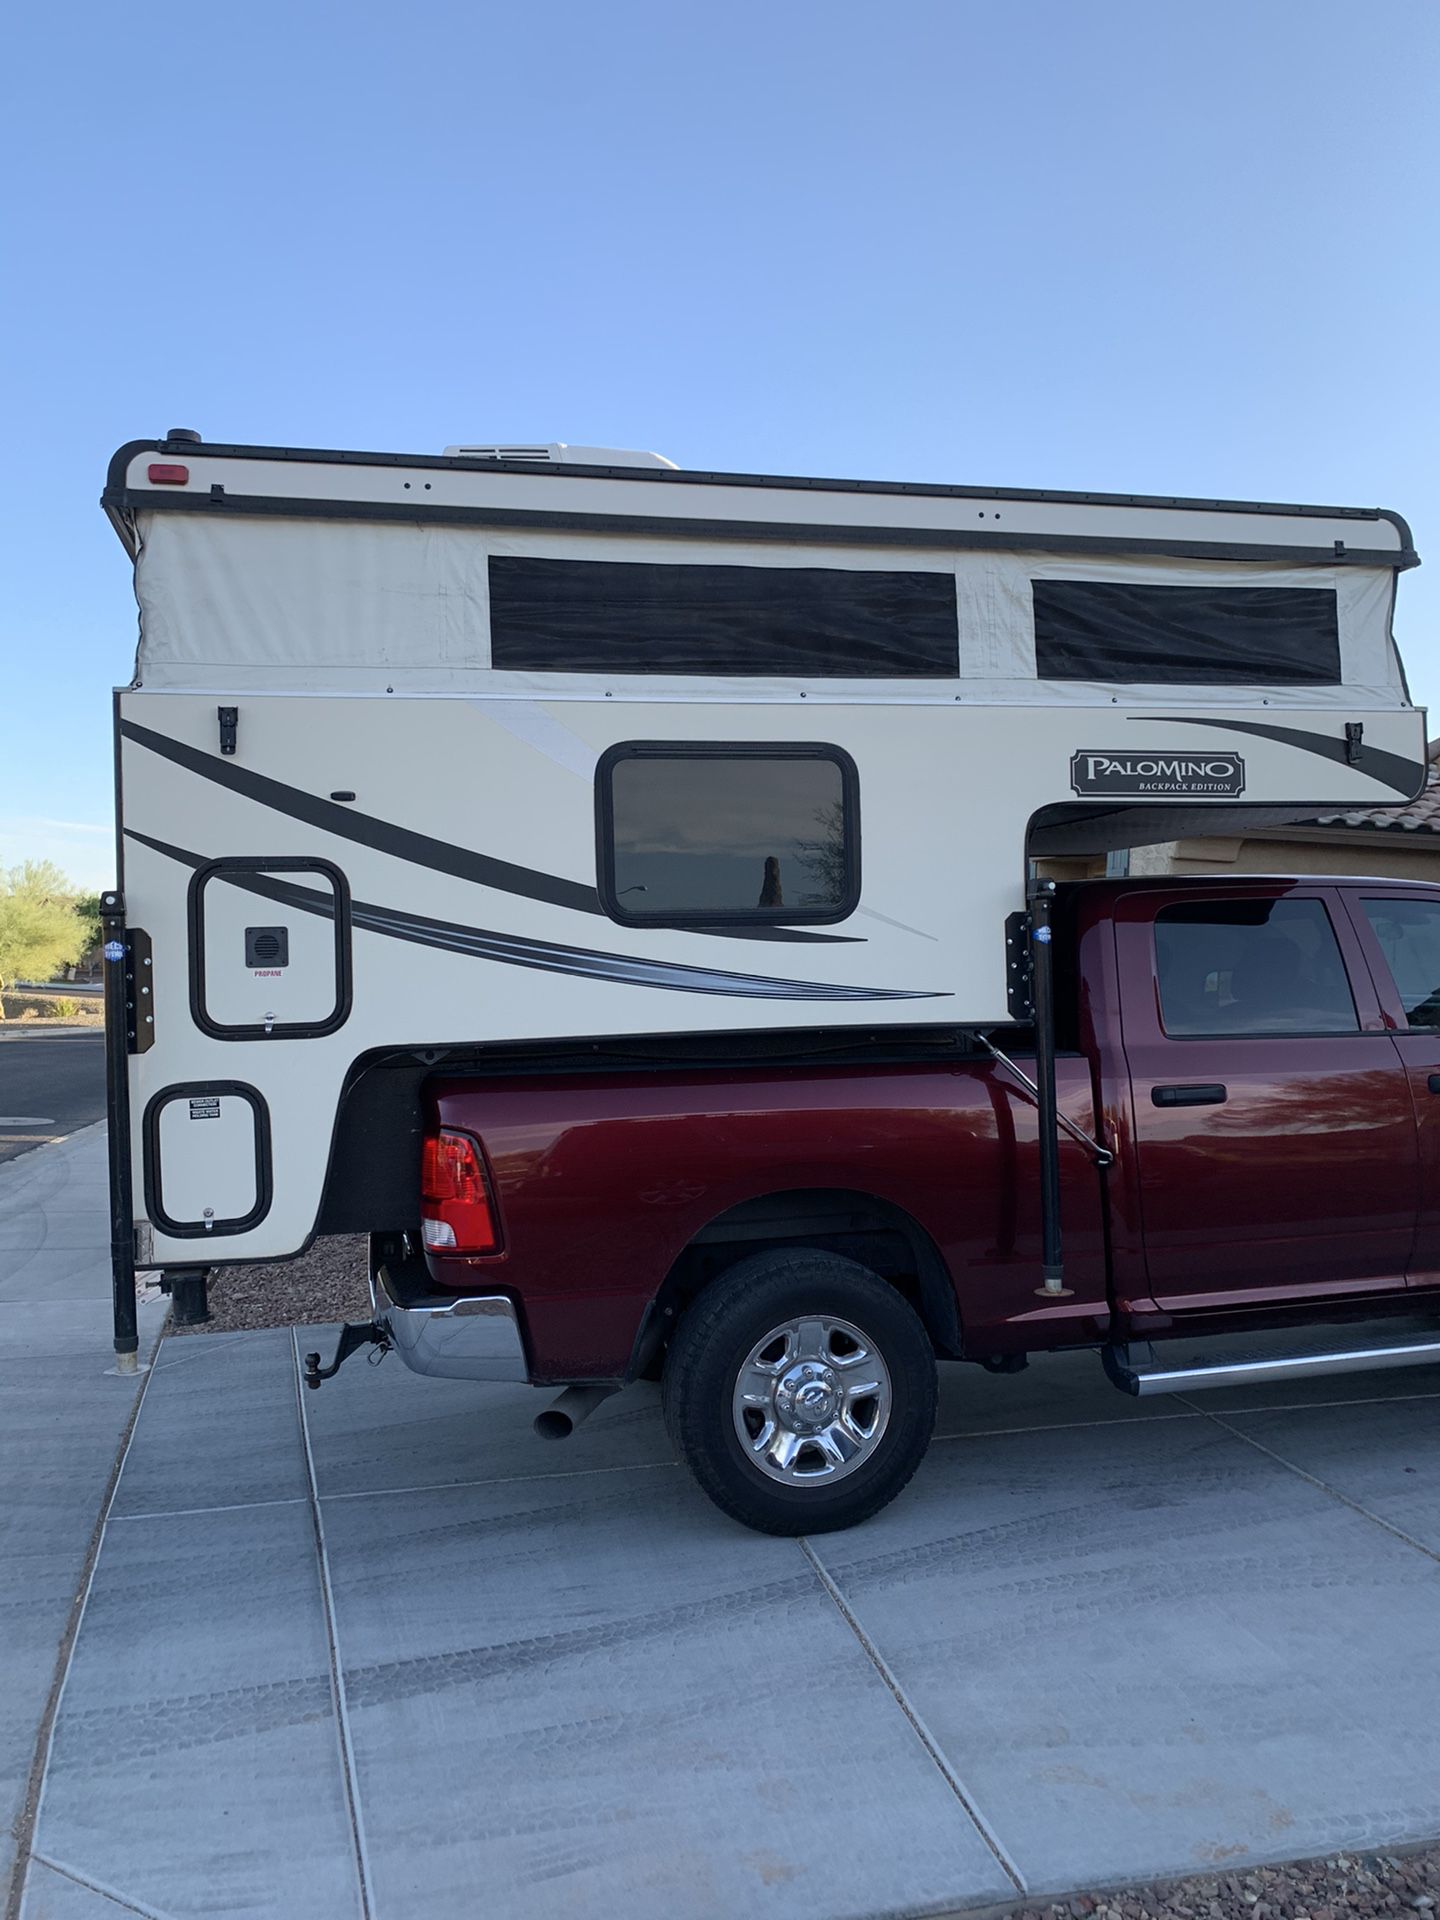 2014 Palomino camper in excellent condition